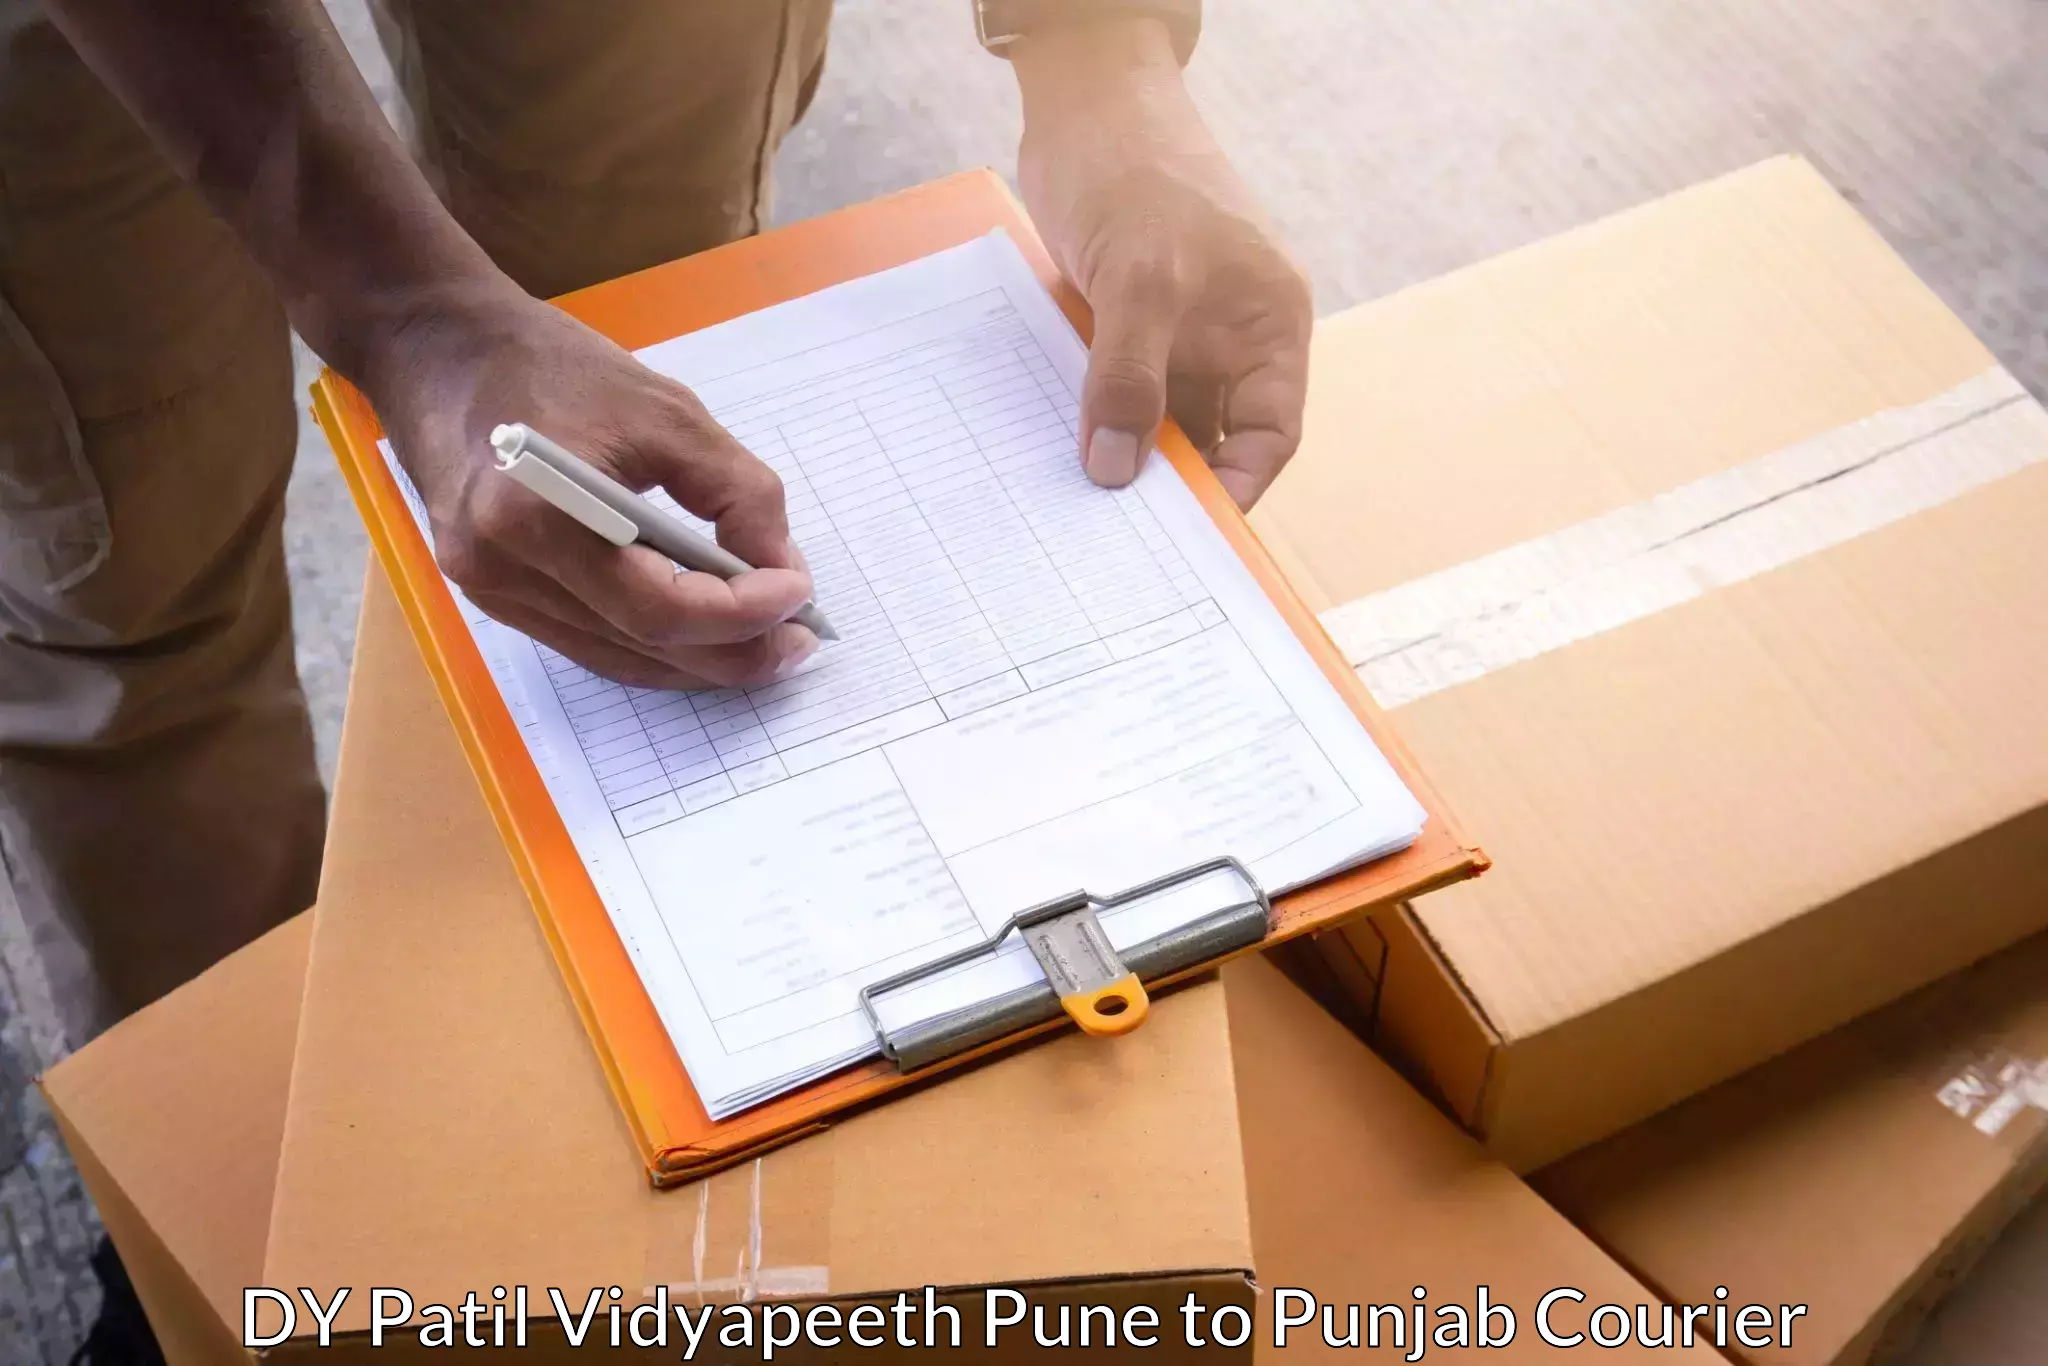 Package delivery network DY Patil Vidyapeeth Pune to Faridkot